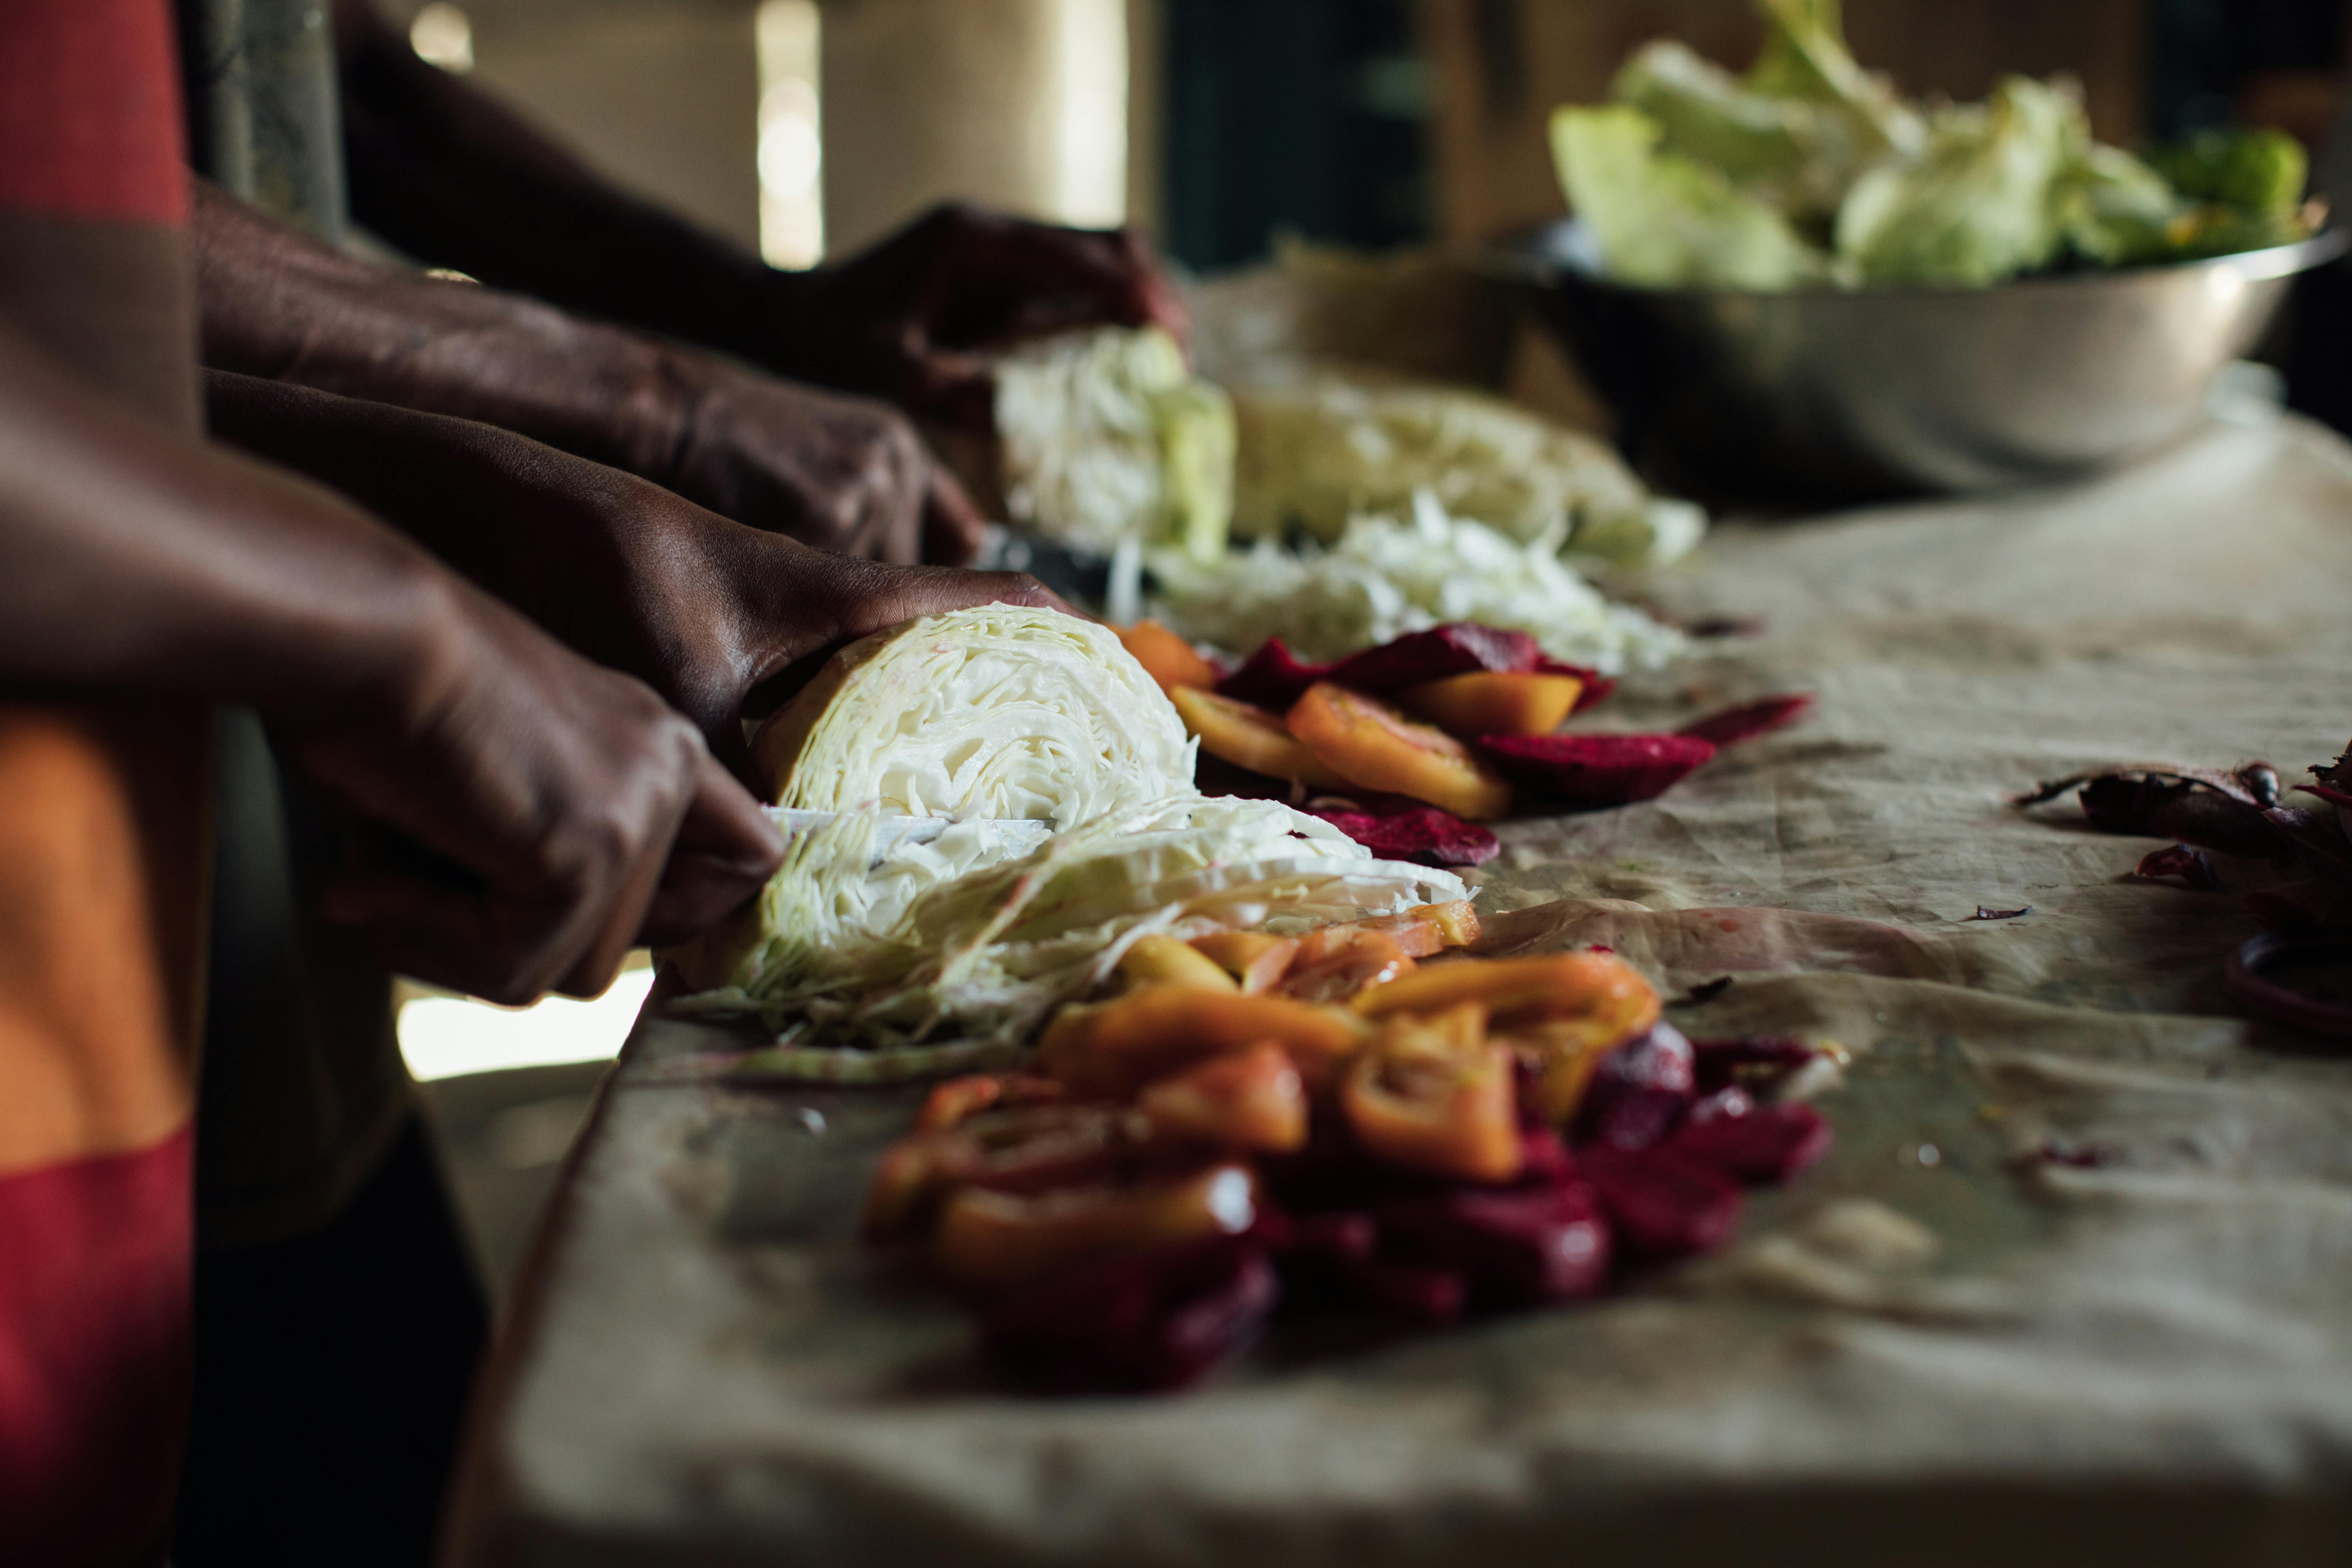 People chopping veggies and preparing food for cooking.